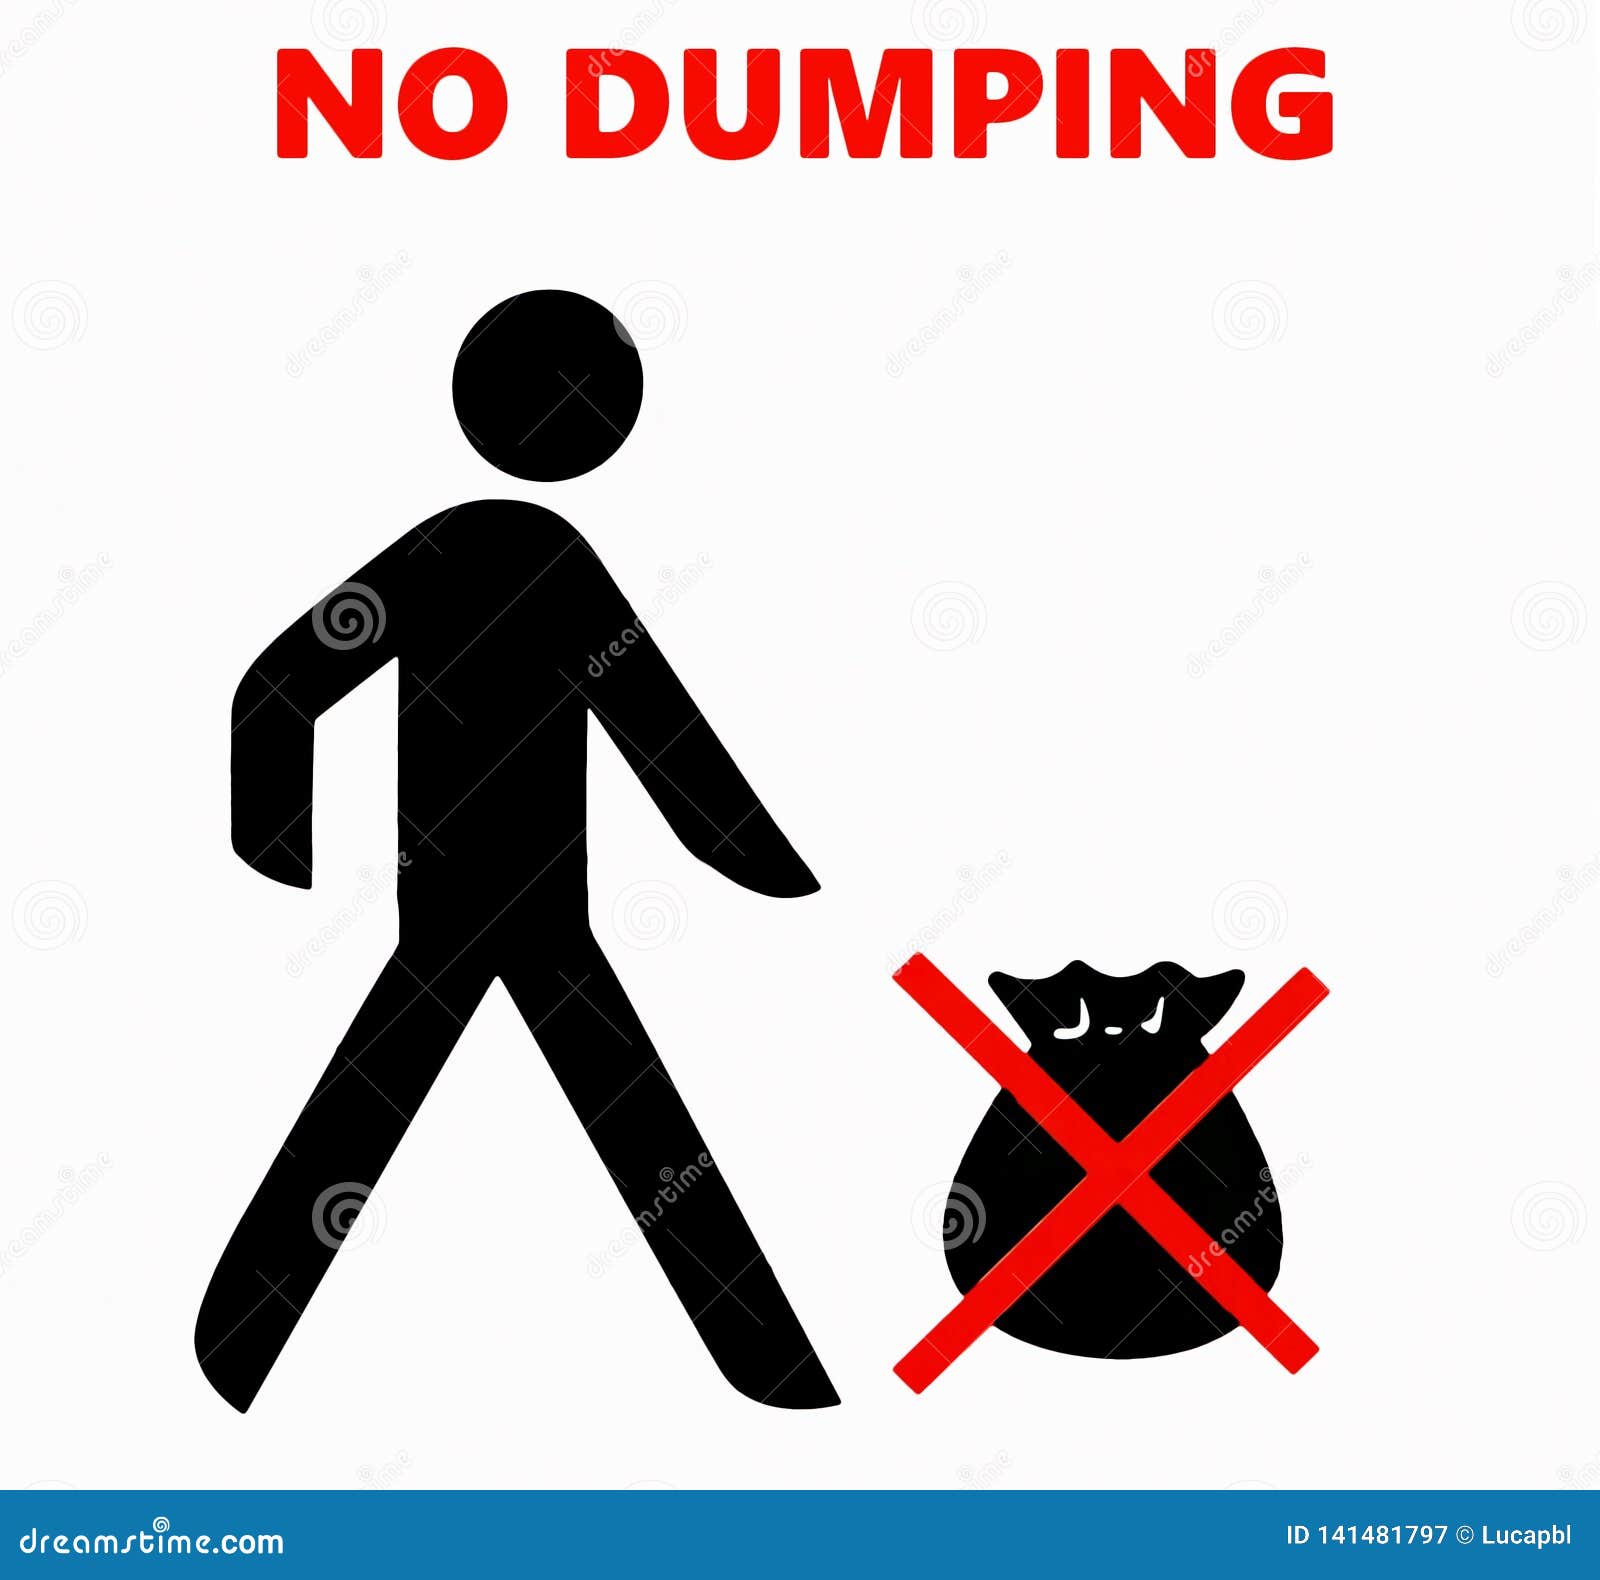 no dumping sign, with a person silhouette and a bag of garbage